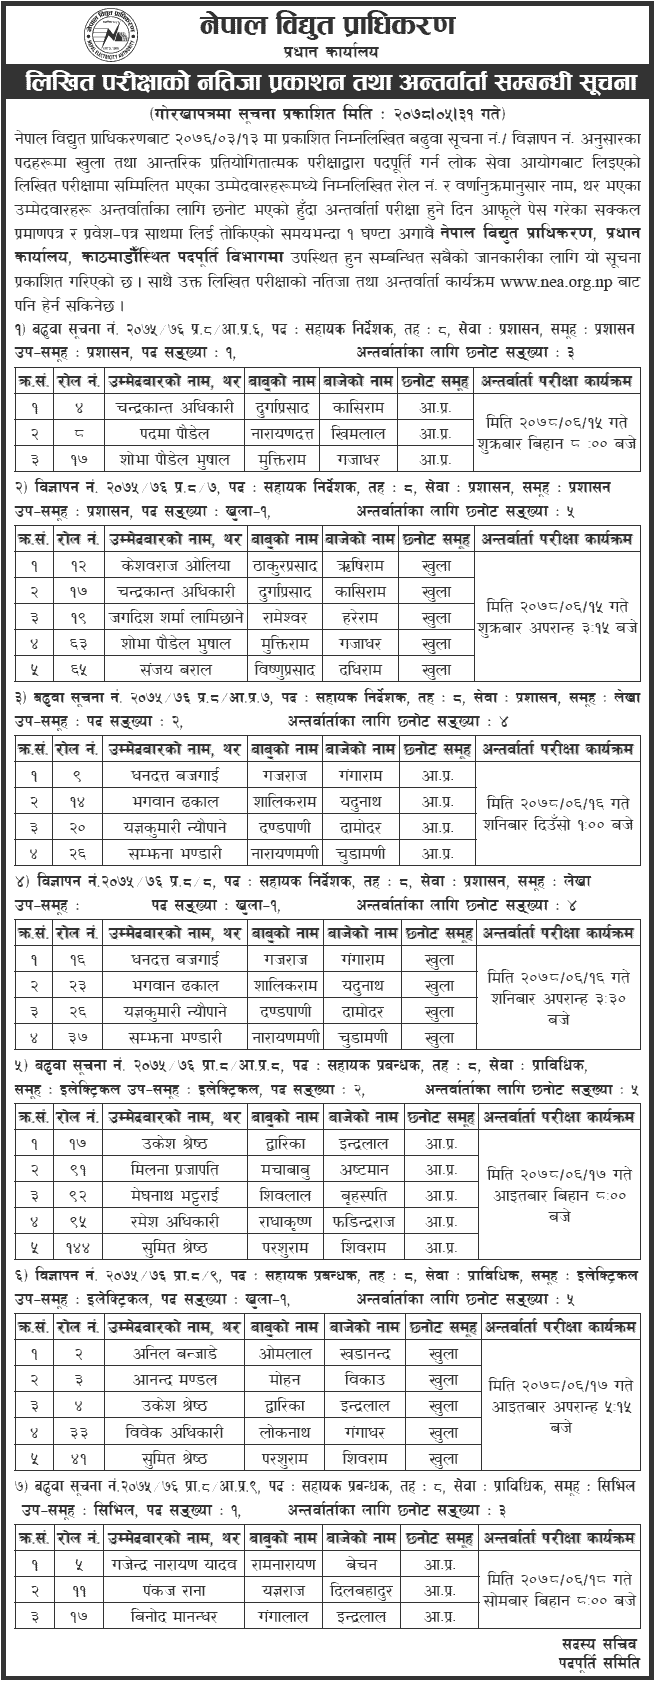 Nepal Electricity Authority (NEA) Written Exam Result and Interview Schedule of 8th Level